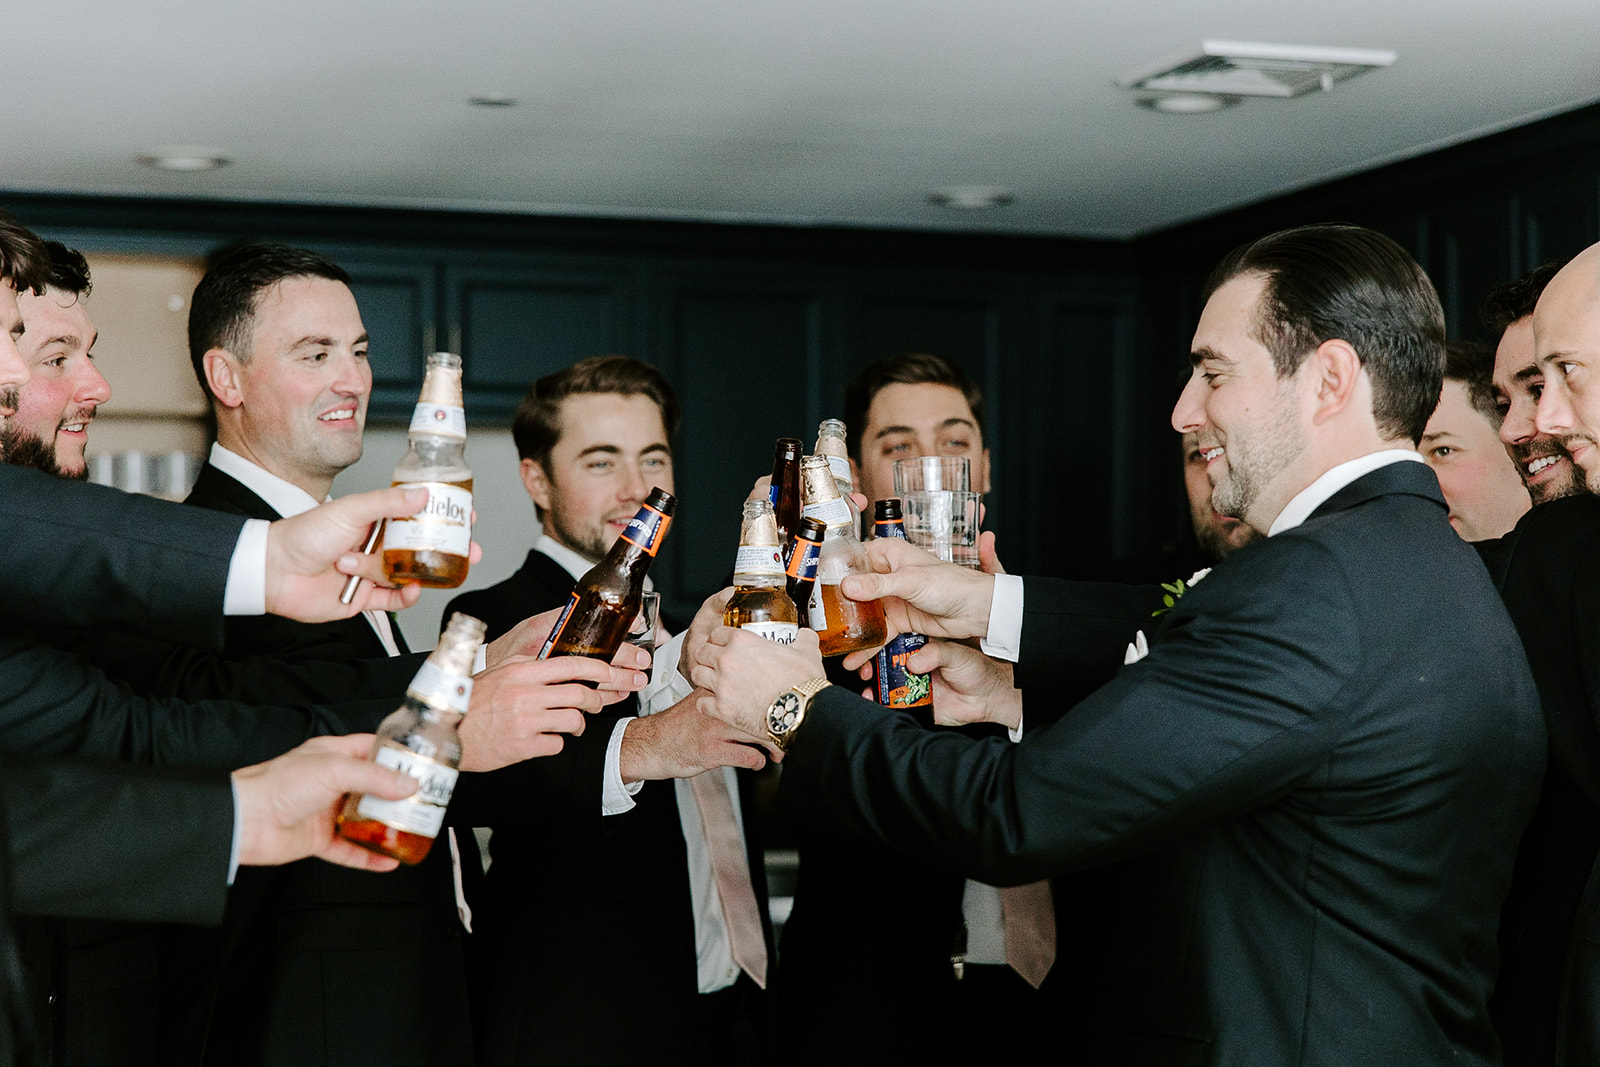 Groomsmen share a toast with the groom shortly before the stunning wedding day